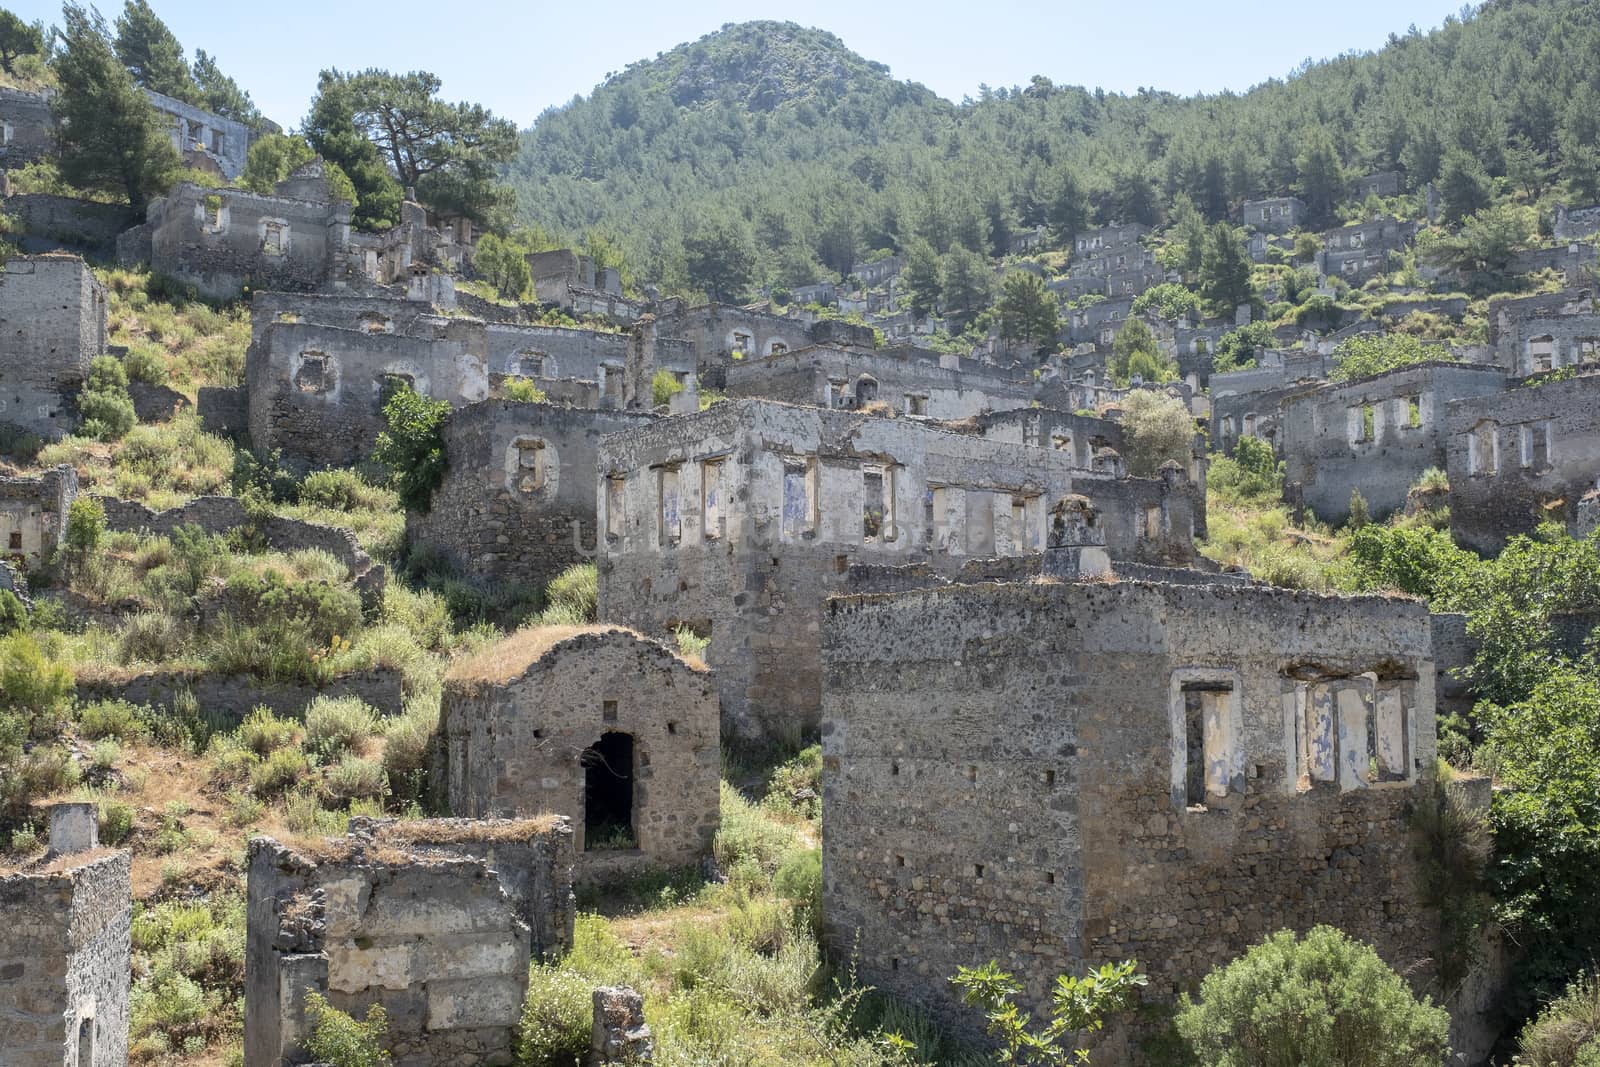 Ghost Town, Abandoned houses and ruins of Kayakoy village, Fethiye, Turkey by oaltindag